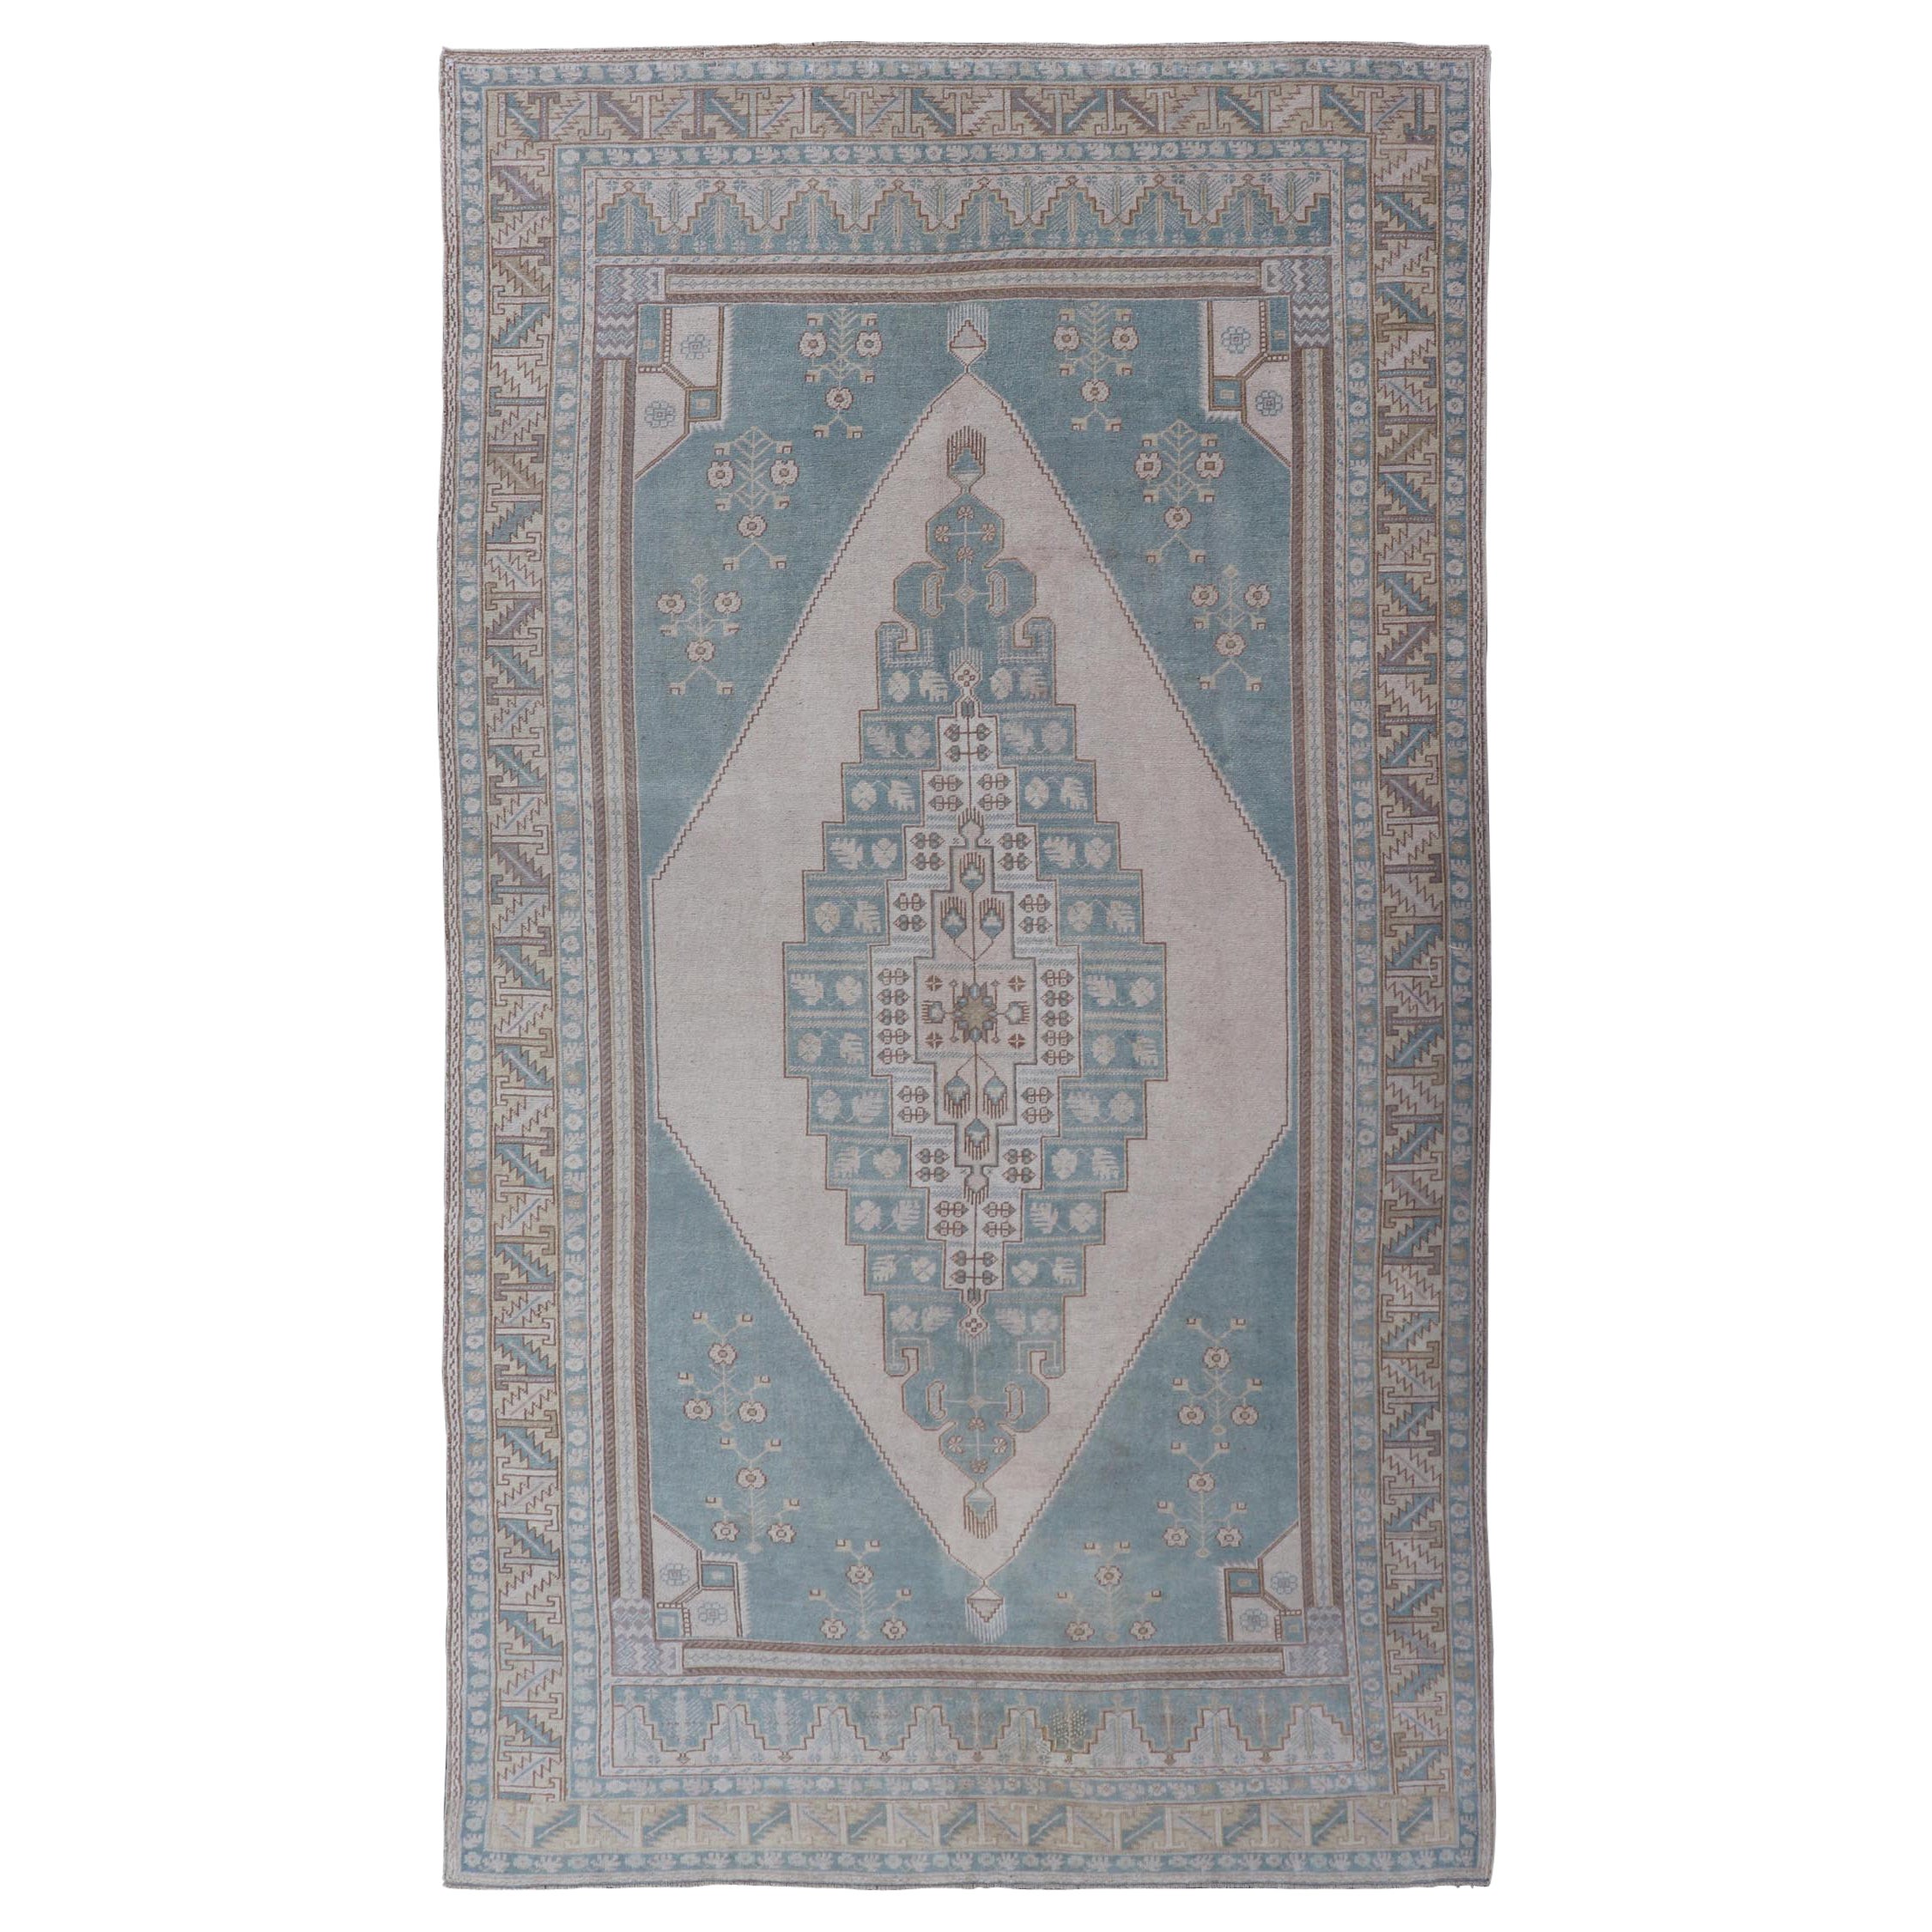 Large Vintage Turkish Oushak Rug with Central Medallion in Blue and Cream